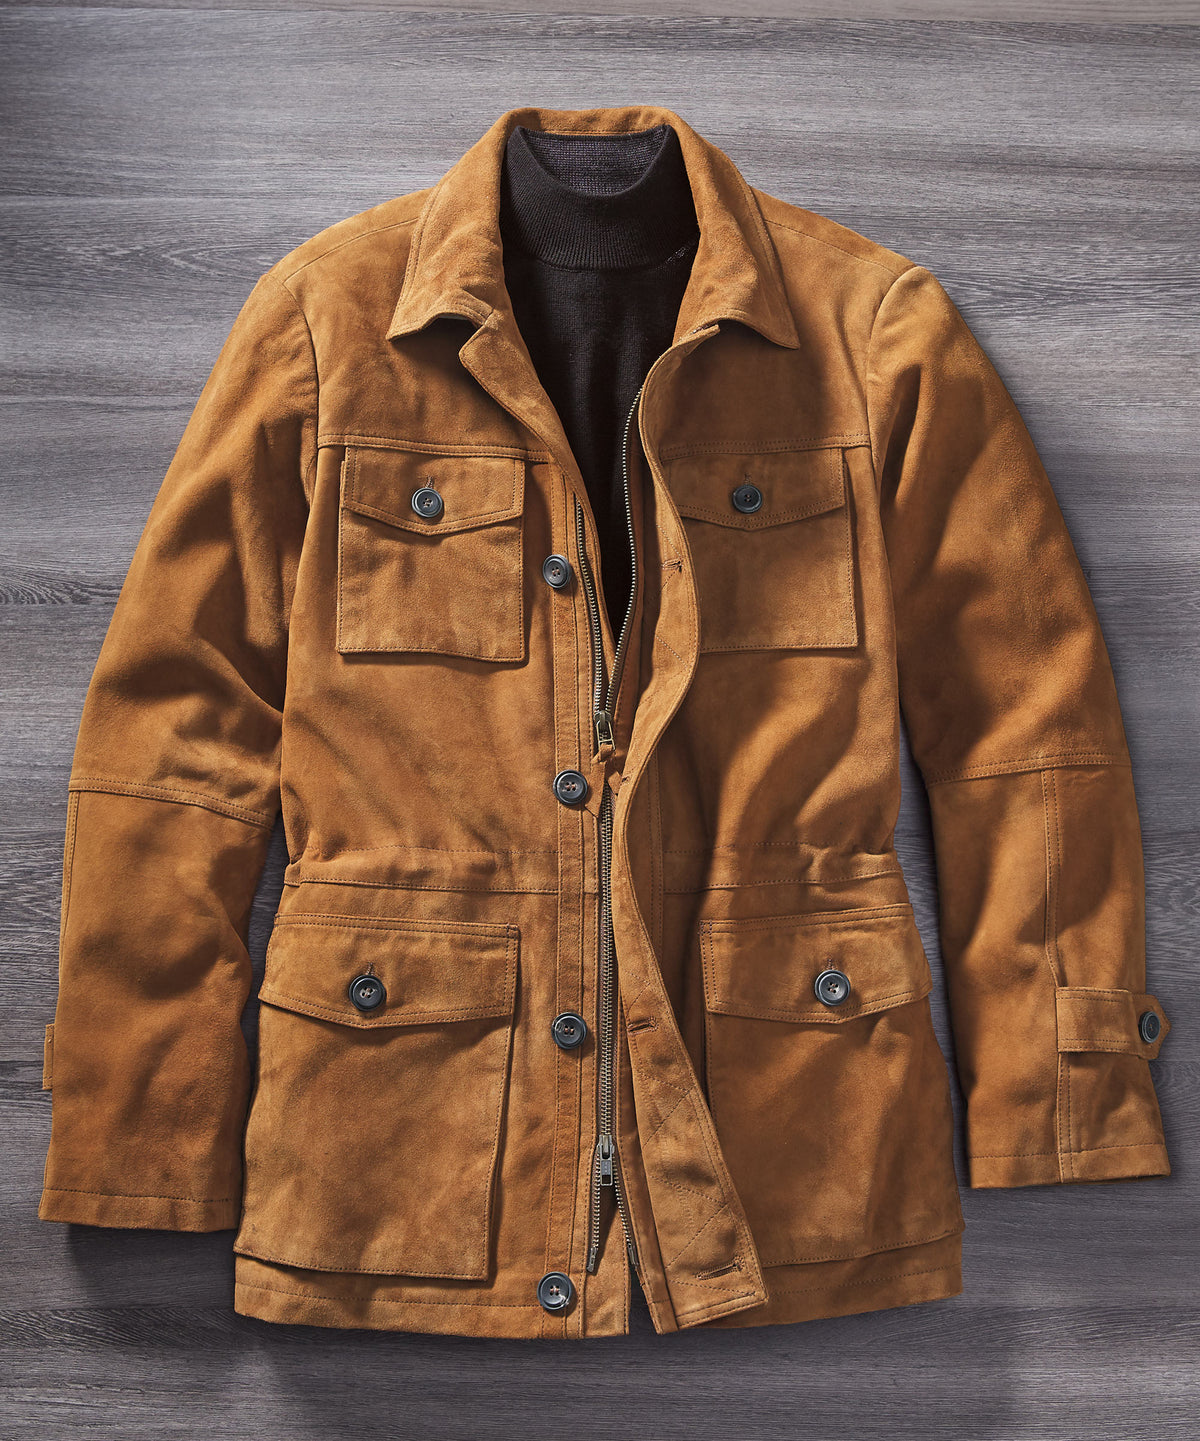 Goat Suede Field Jacket - Cocoa